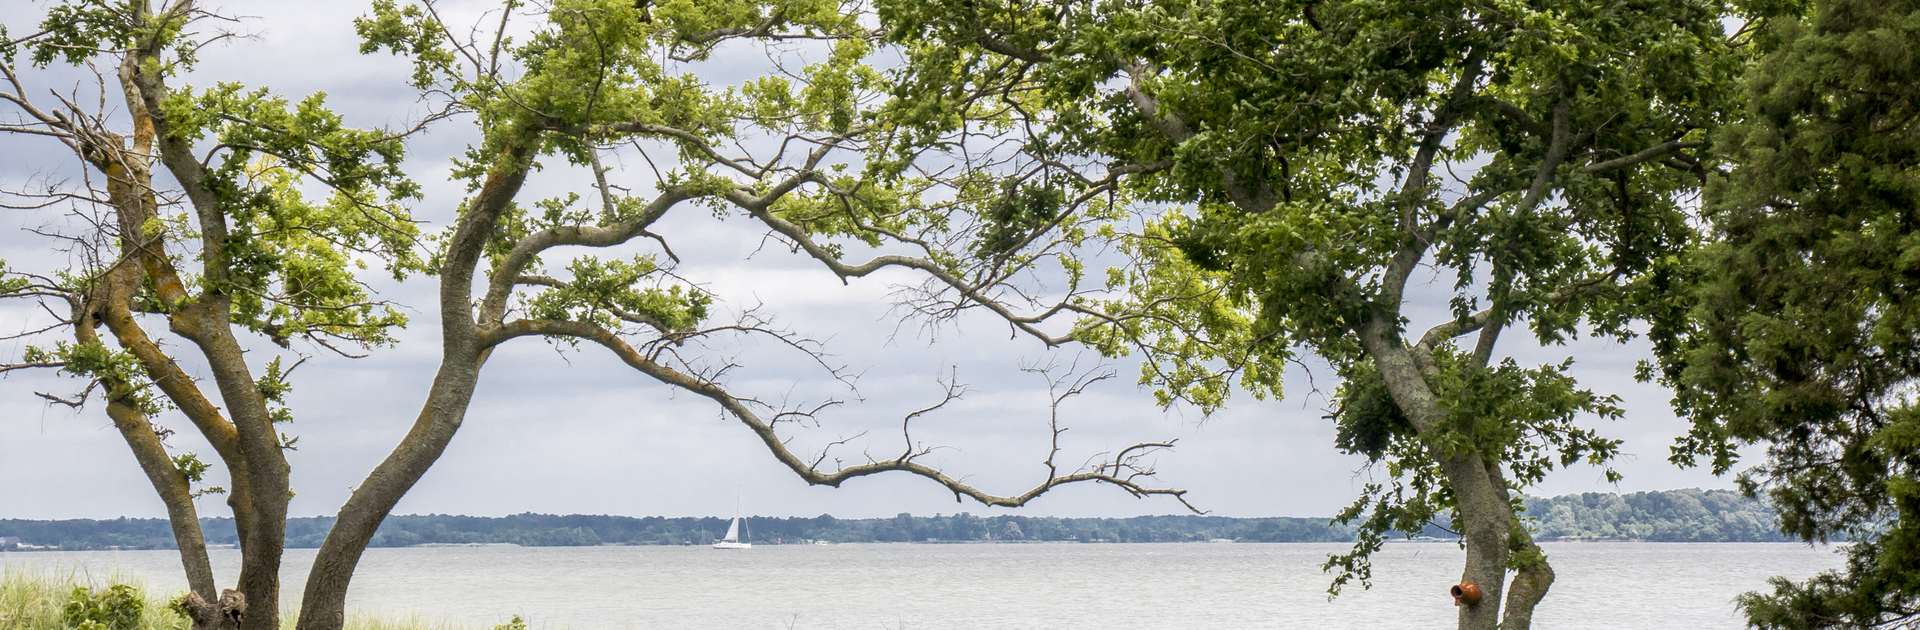 trees over looking the chesapeake bay